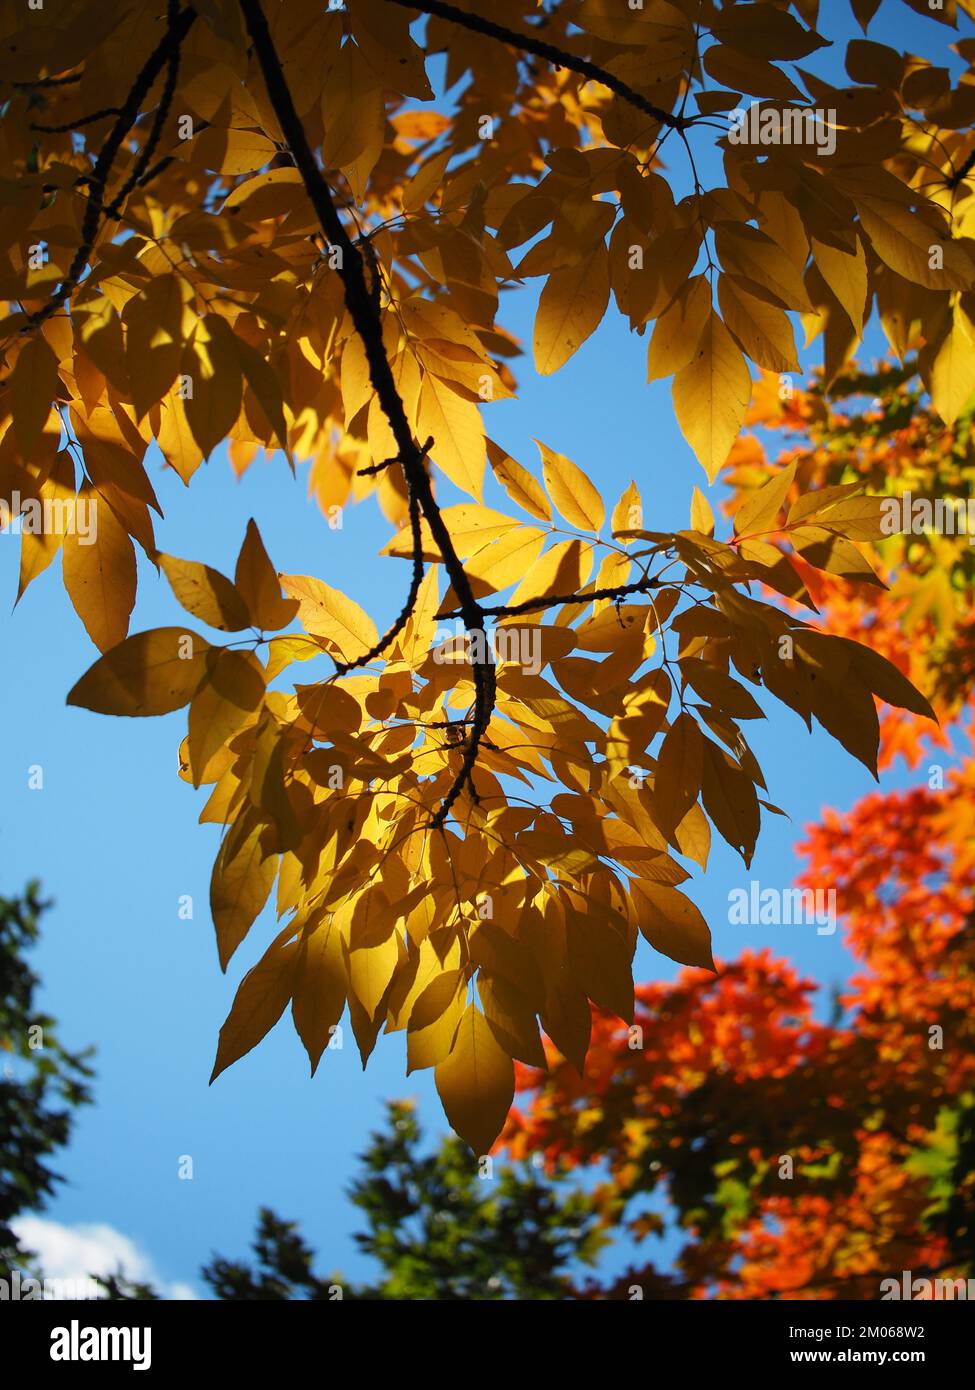 Stunning fall yellow leaves glowing in the late afternoon sunlight. Stock Photo